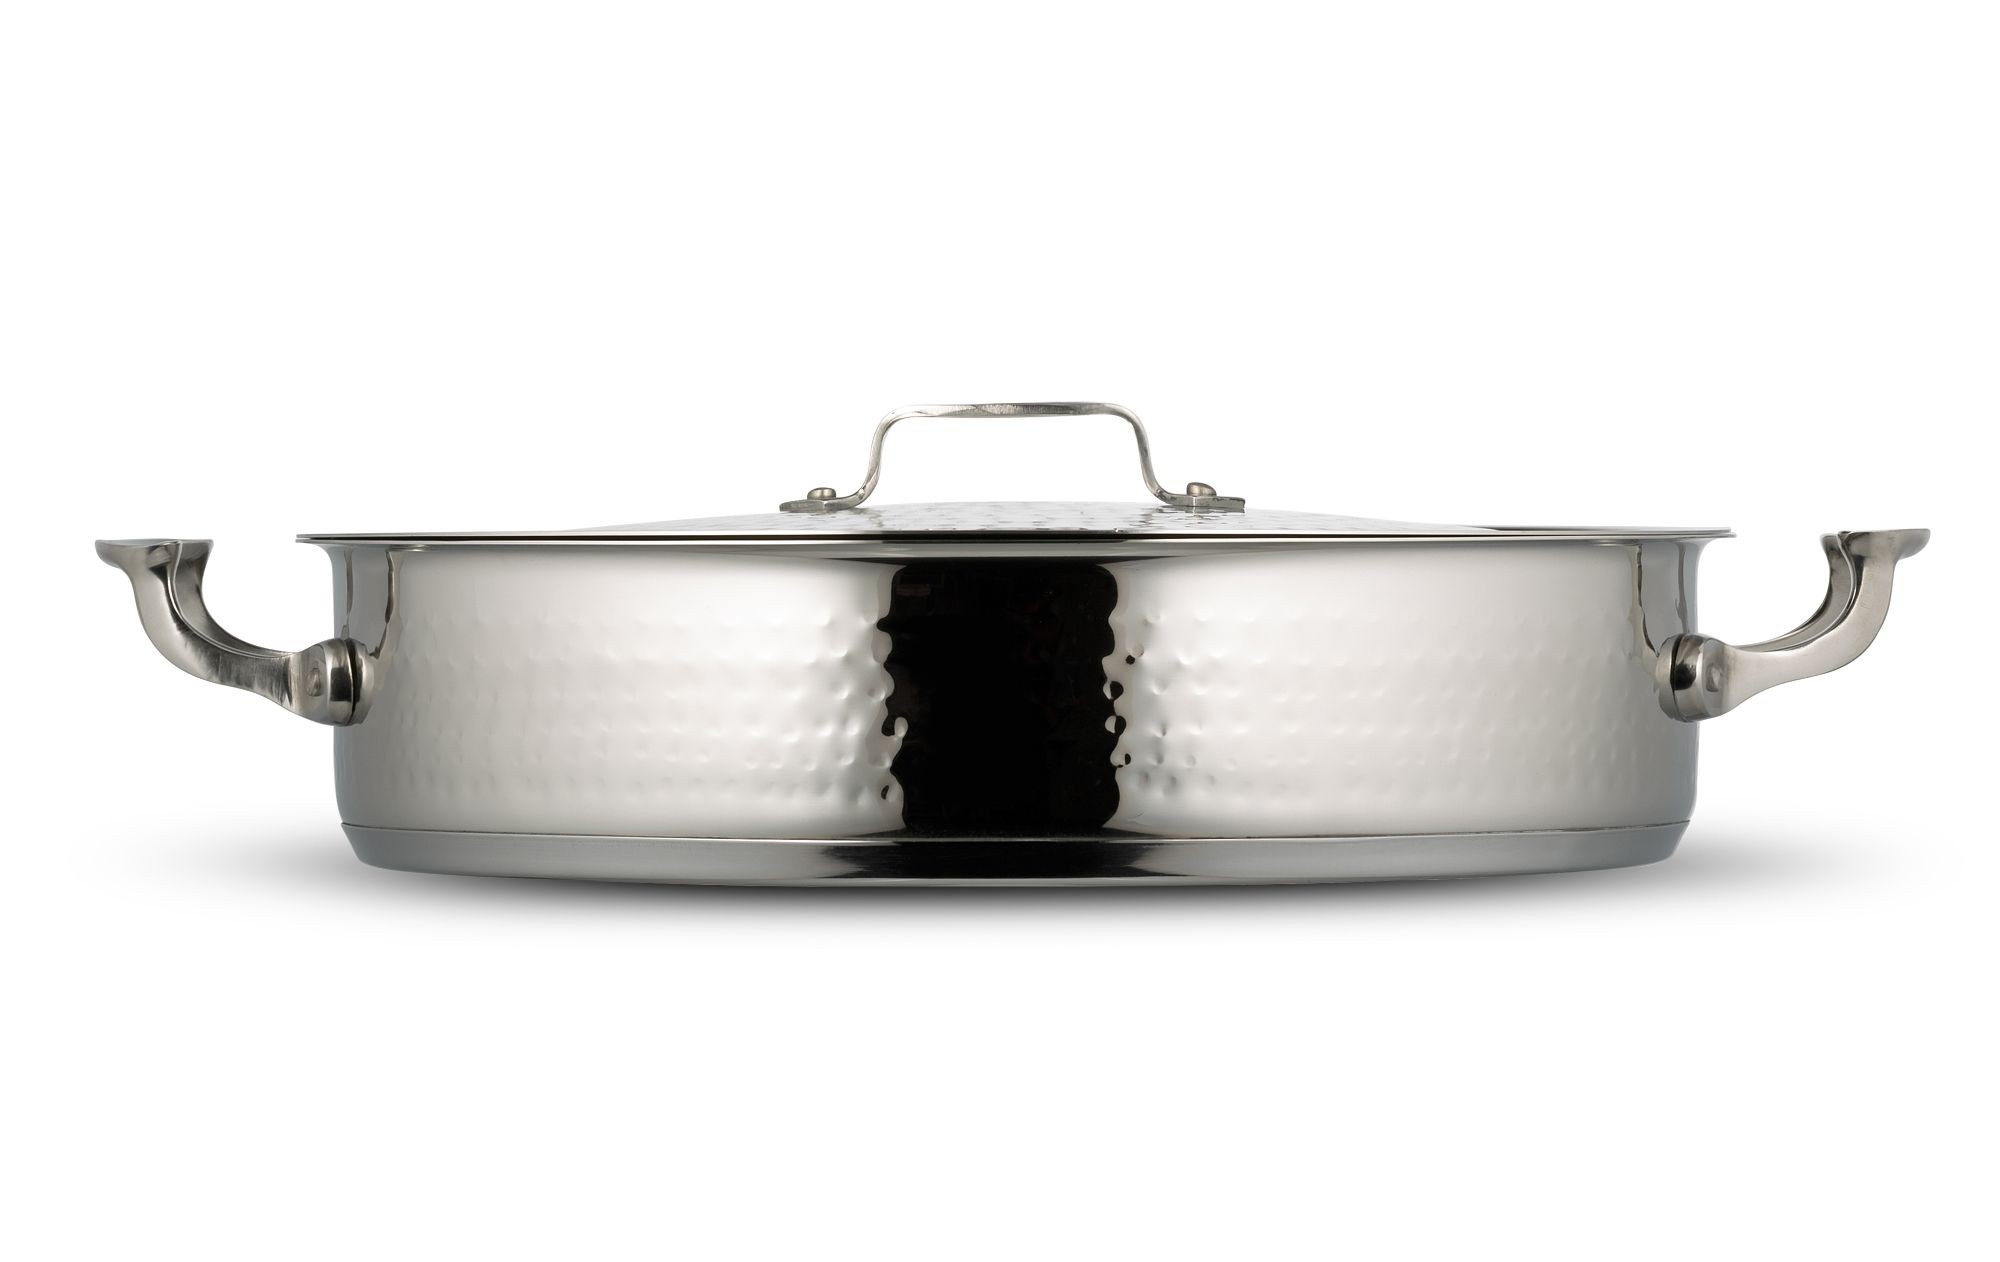 Bon Chef 60032HF Cucina Stainless Steel Pot with Cover, Hammered Finish, 9 Qt.